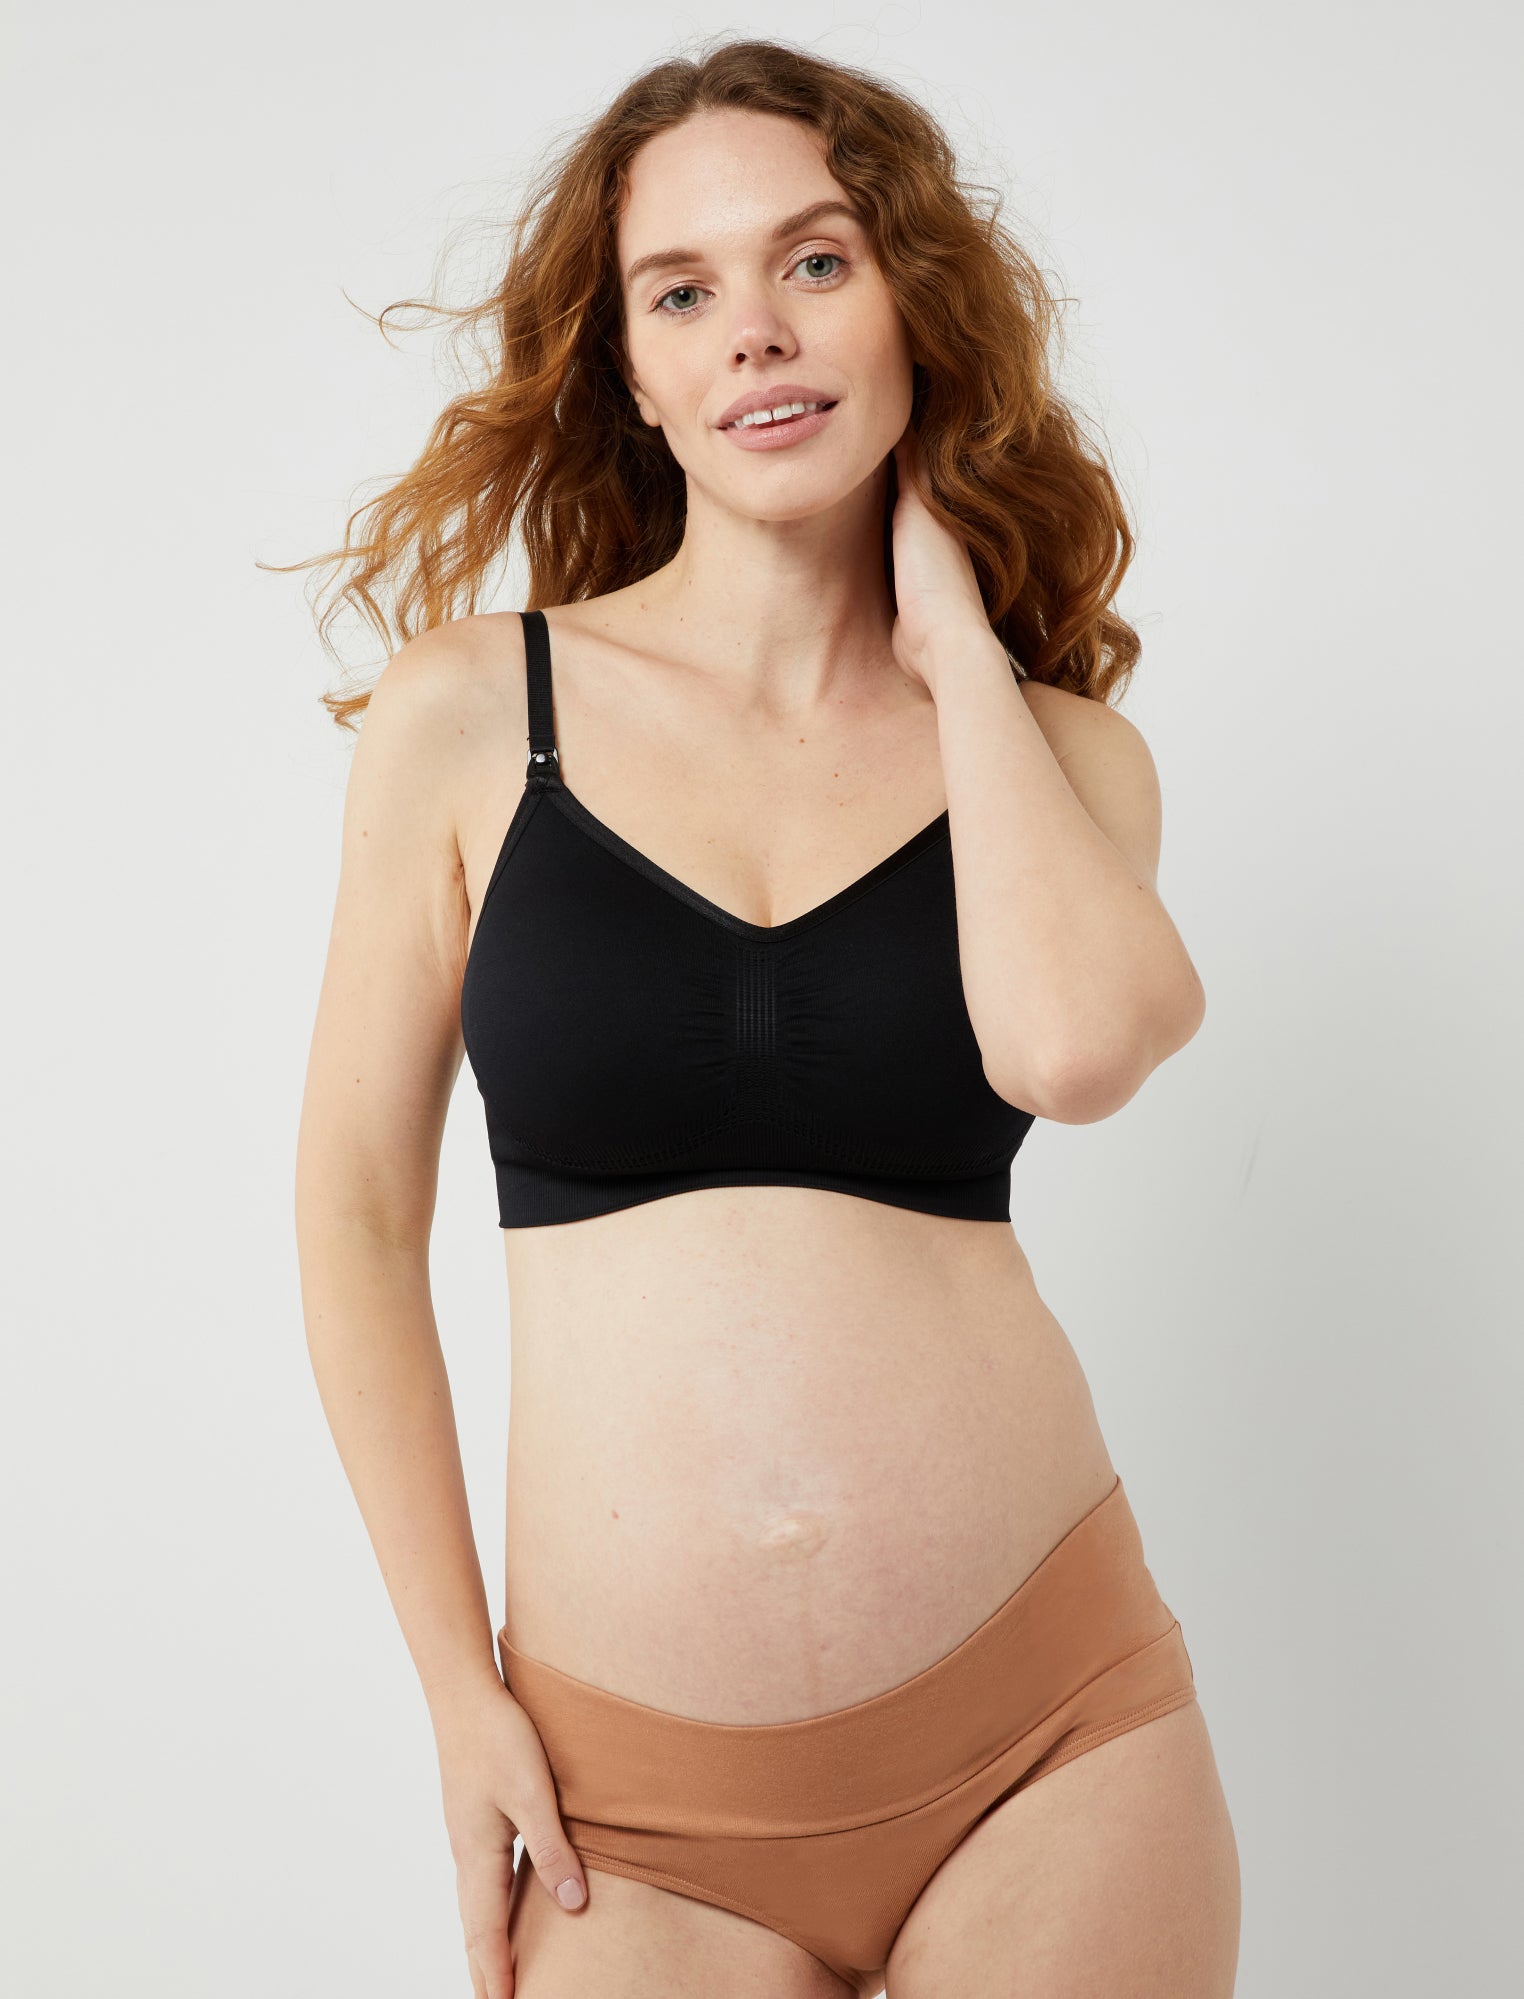 Stay sexy, comfortable and confident with the high-quality Cosabella  Nursing Bras and Maternity Wear Cosabella Nursing Bras and Maternity Wear